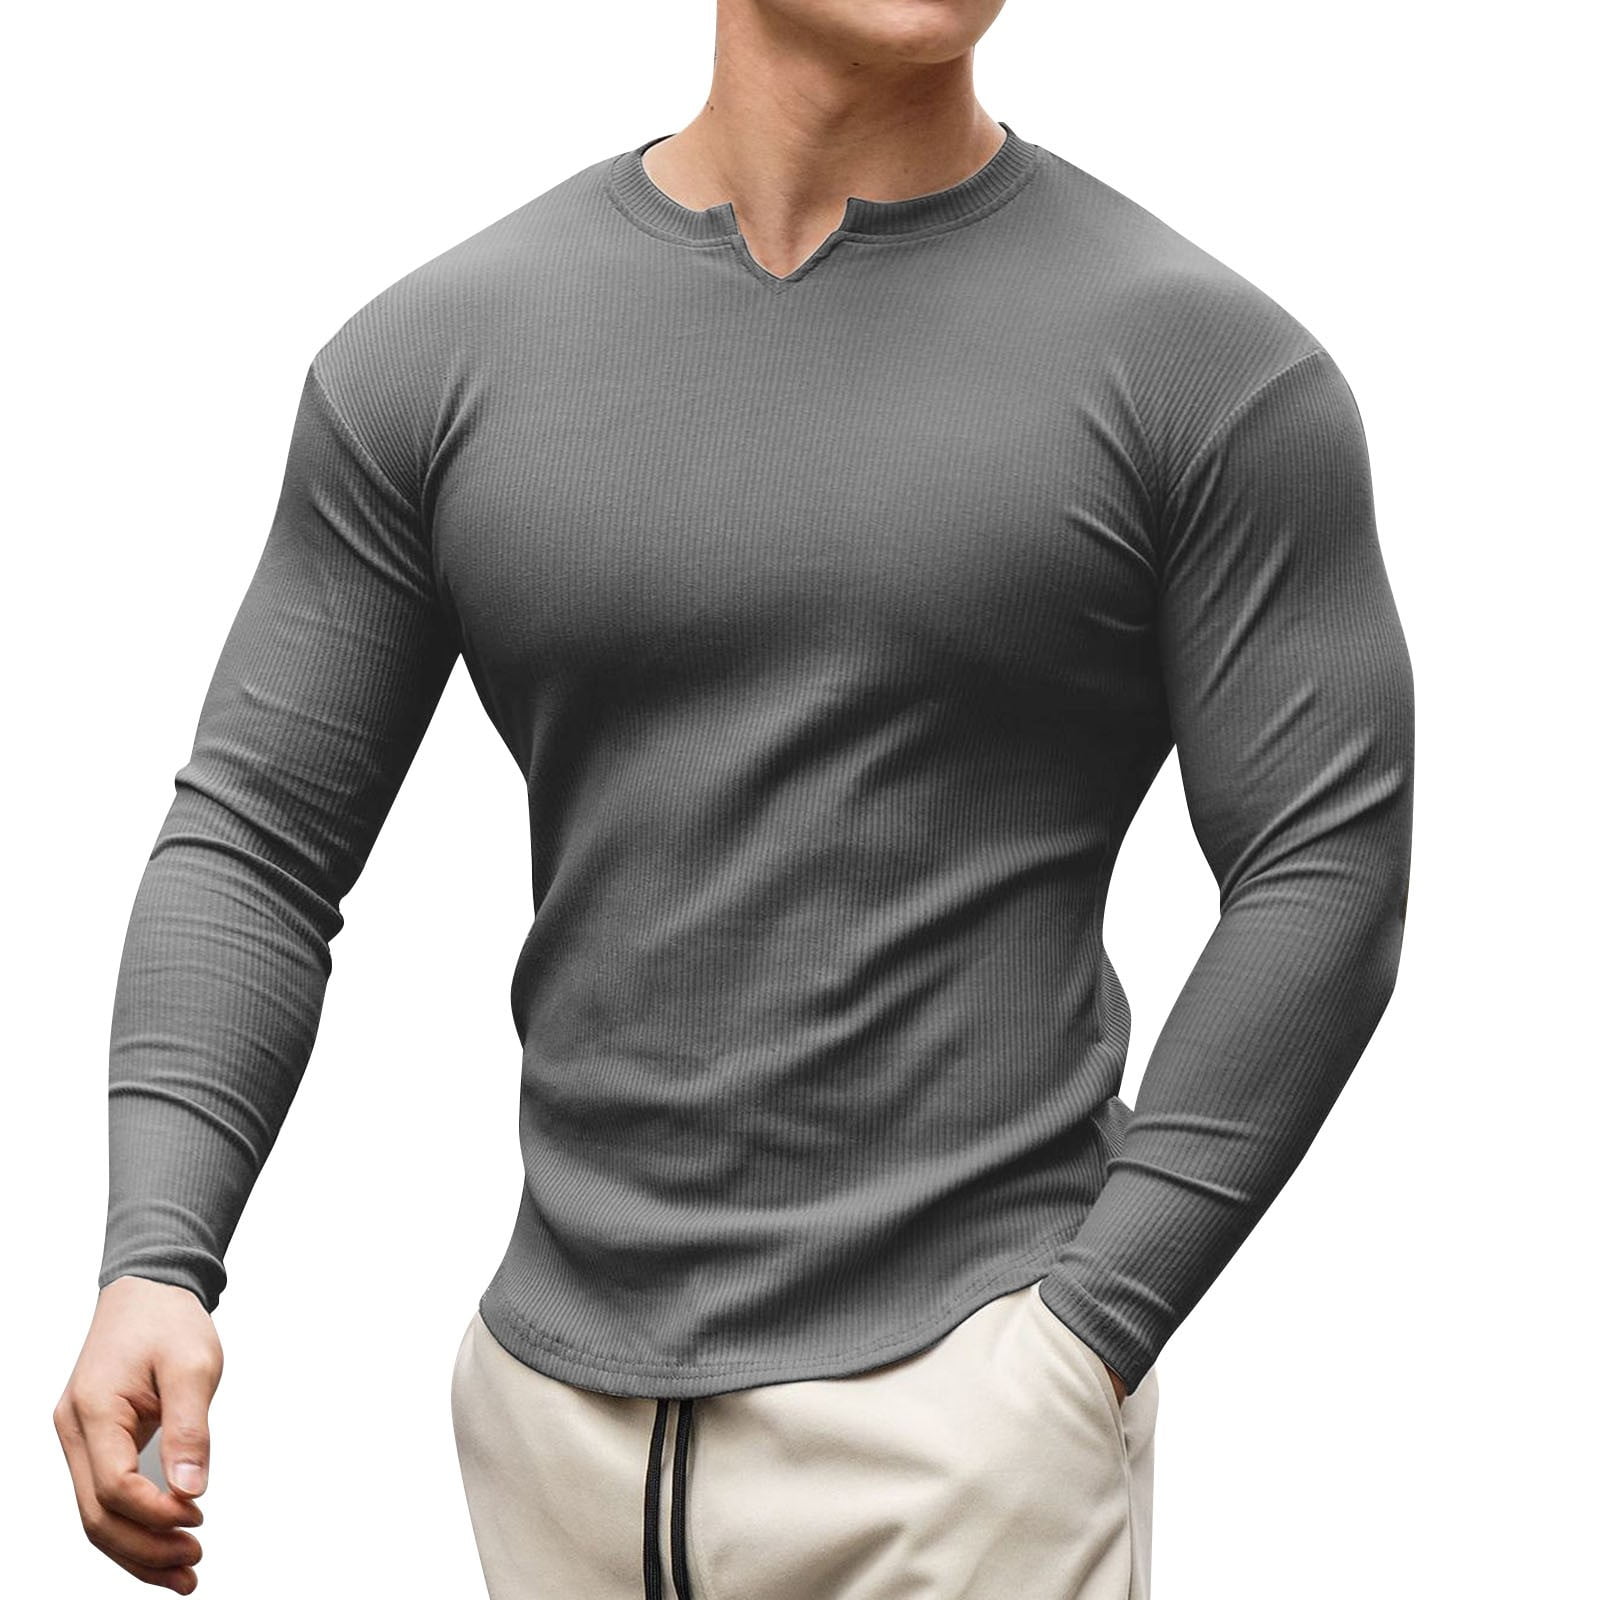 Mens Shirt Male Spring Summer V-Neck Tops With Long Sleeve Casual Elastic Slim Fit T-Shirts For - Walmart.com